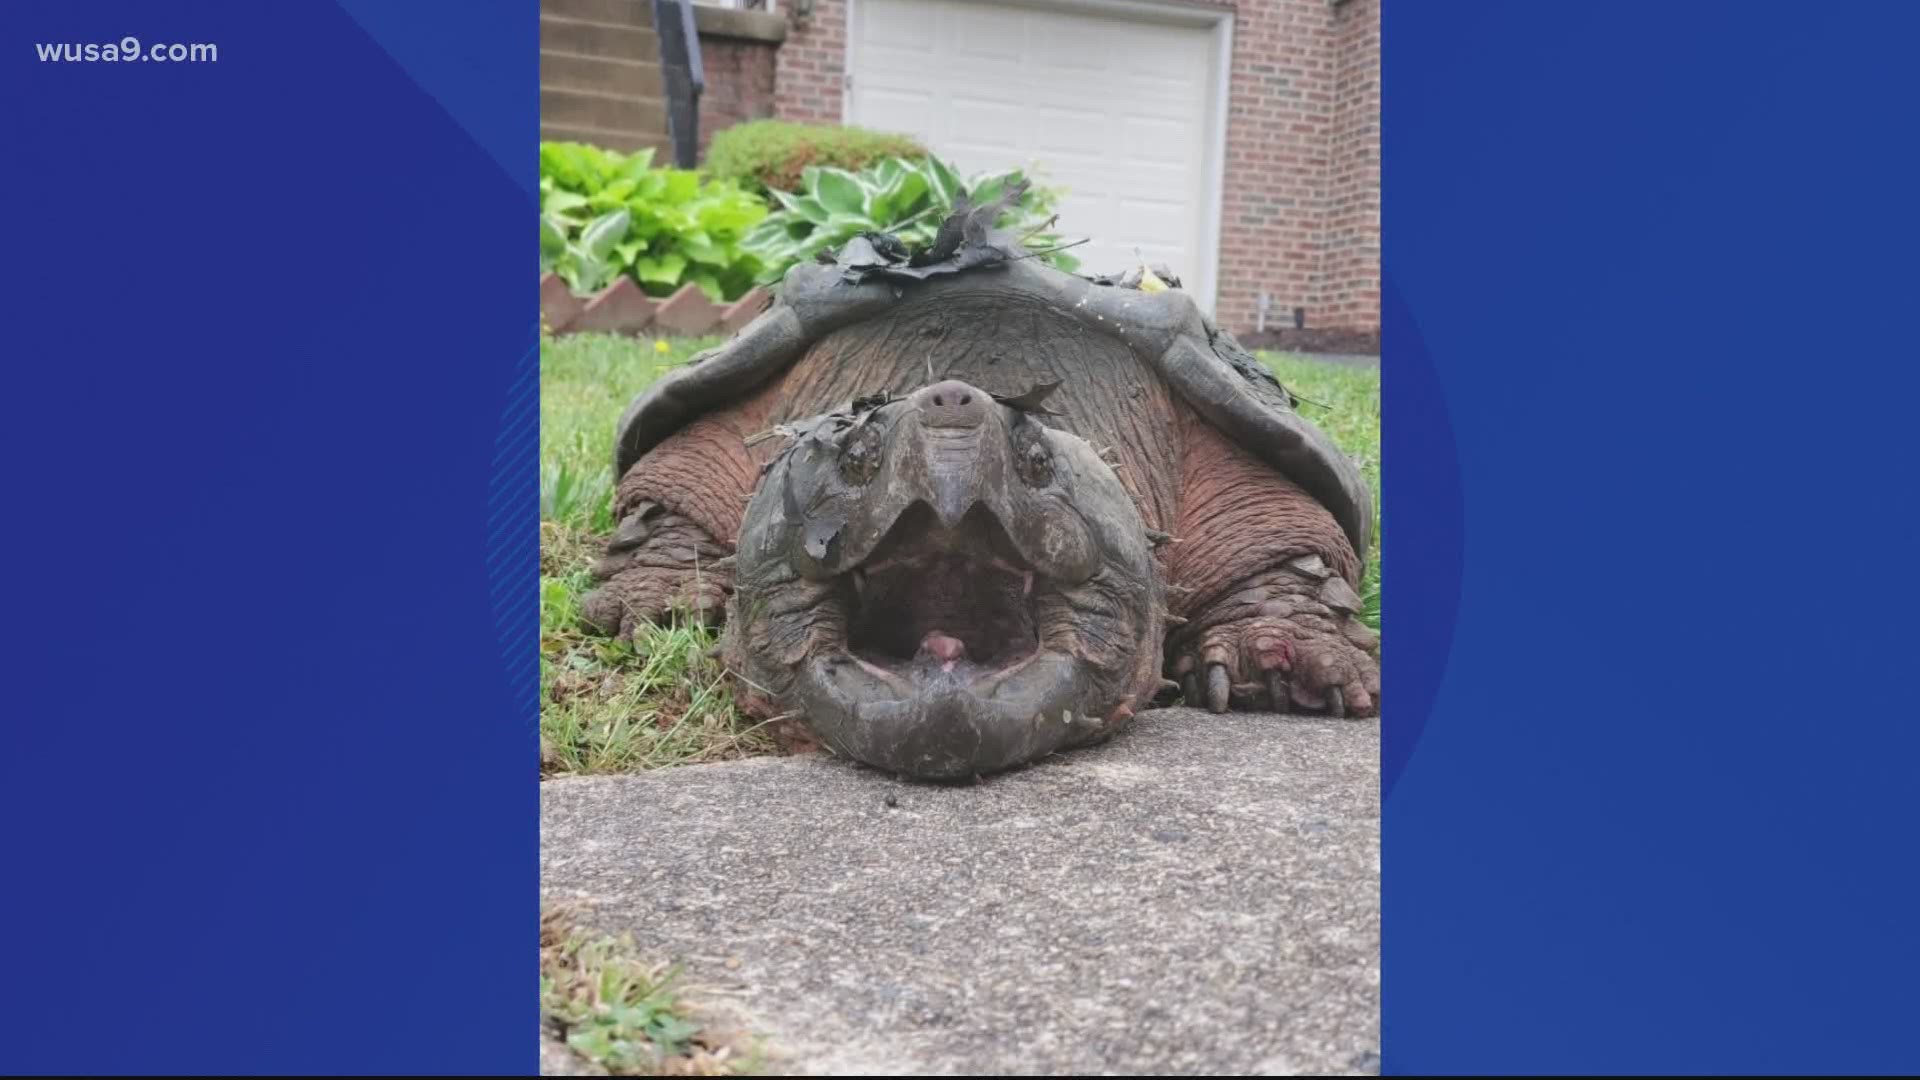 Animal Protection Police went to the neighborhood after getting calls that the large turtle had been seen in the residential area.